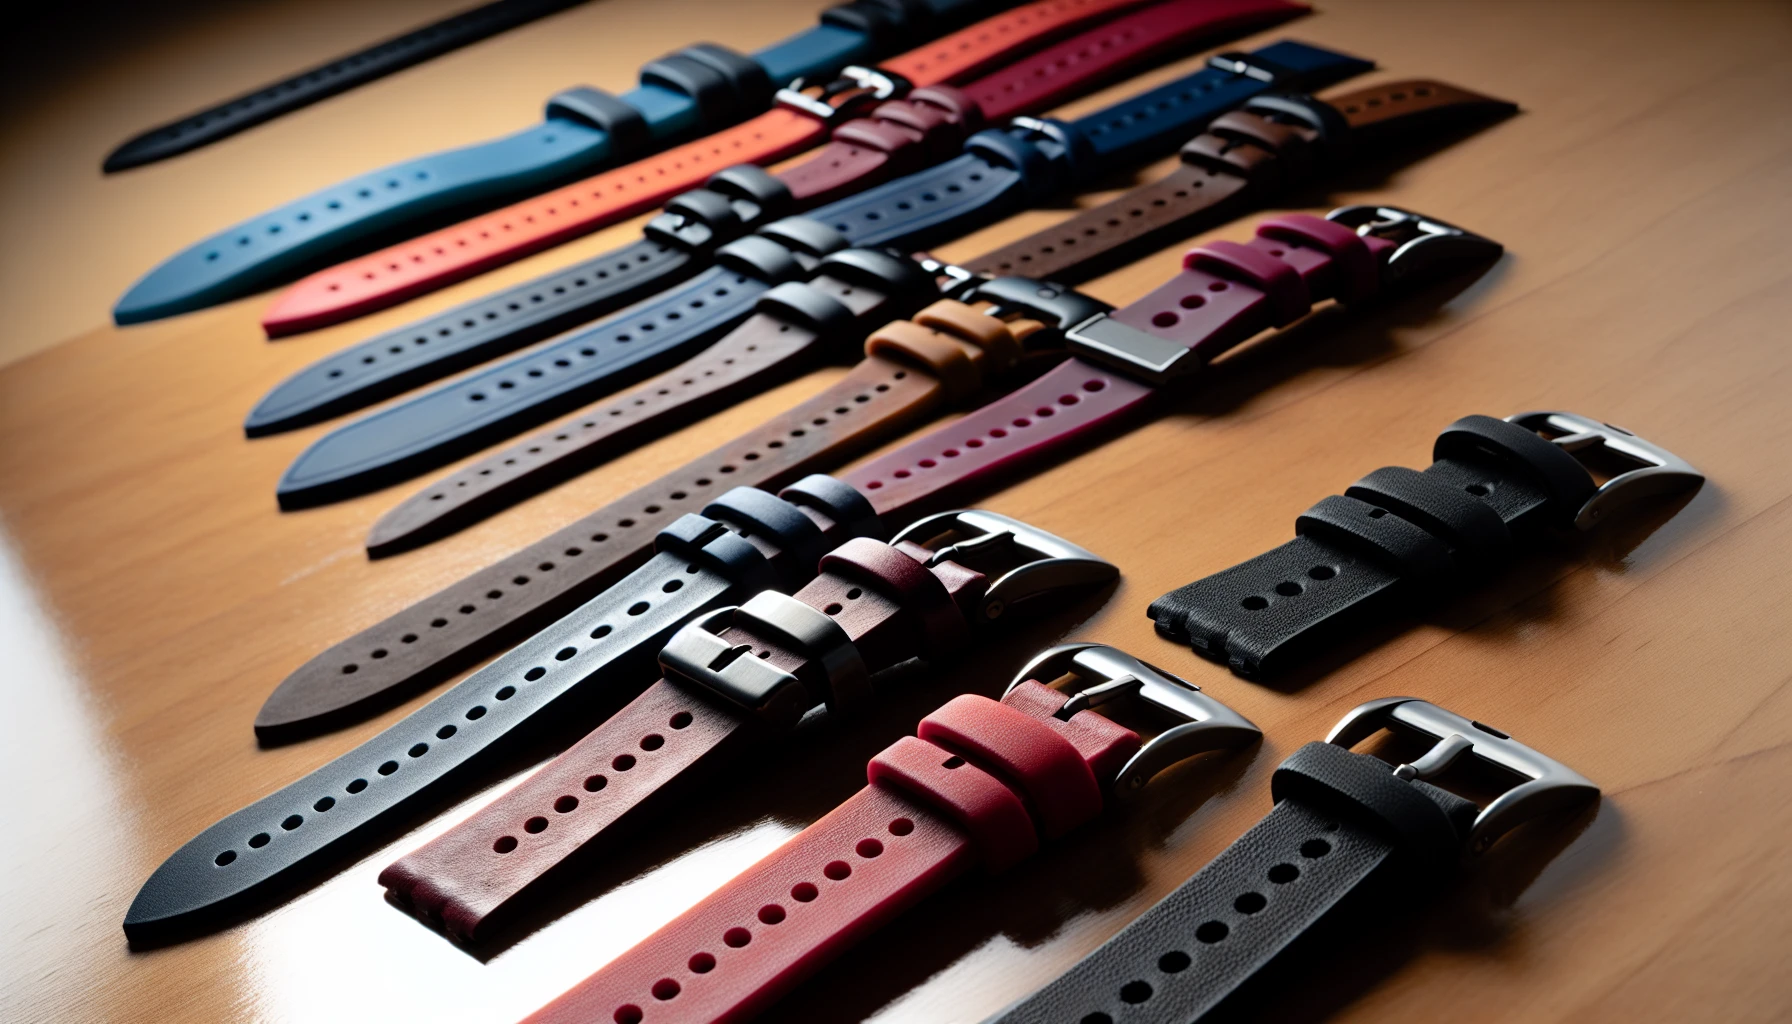 Various rubber watch straps displayed on a surface